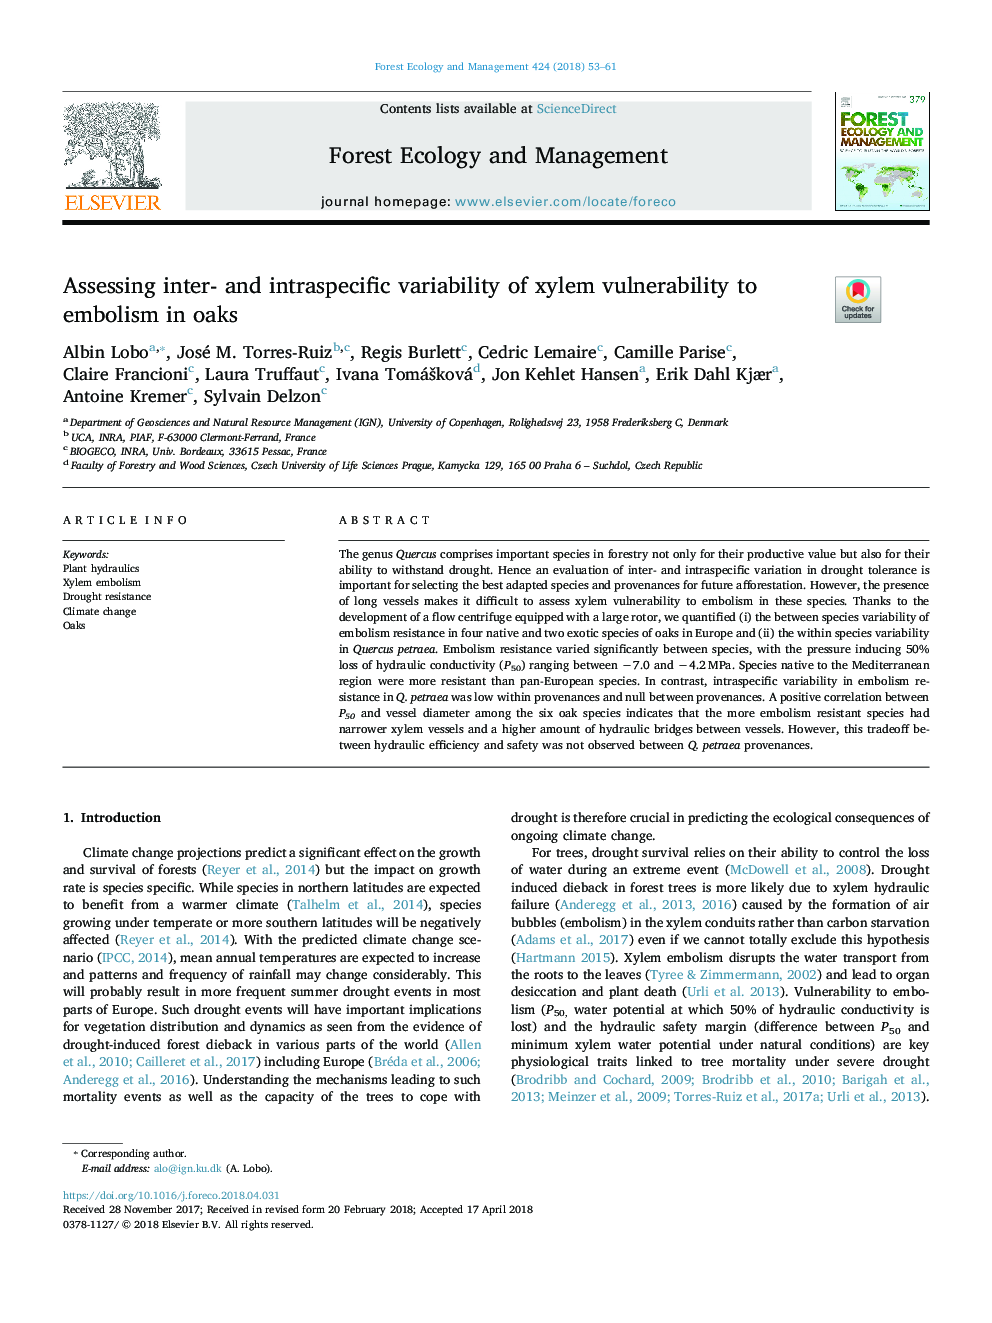 Assessing inter- and intraspecific variability of xylem vulnerability to embolism in oaks